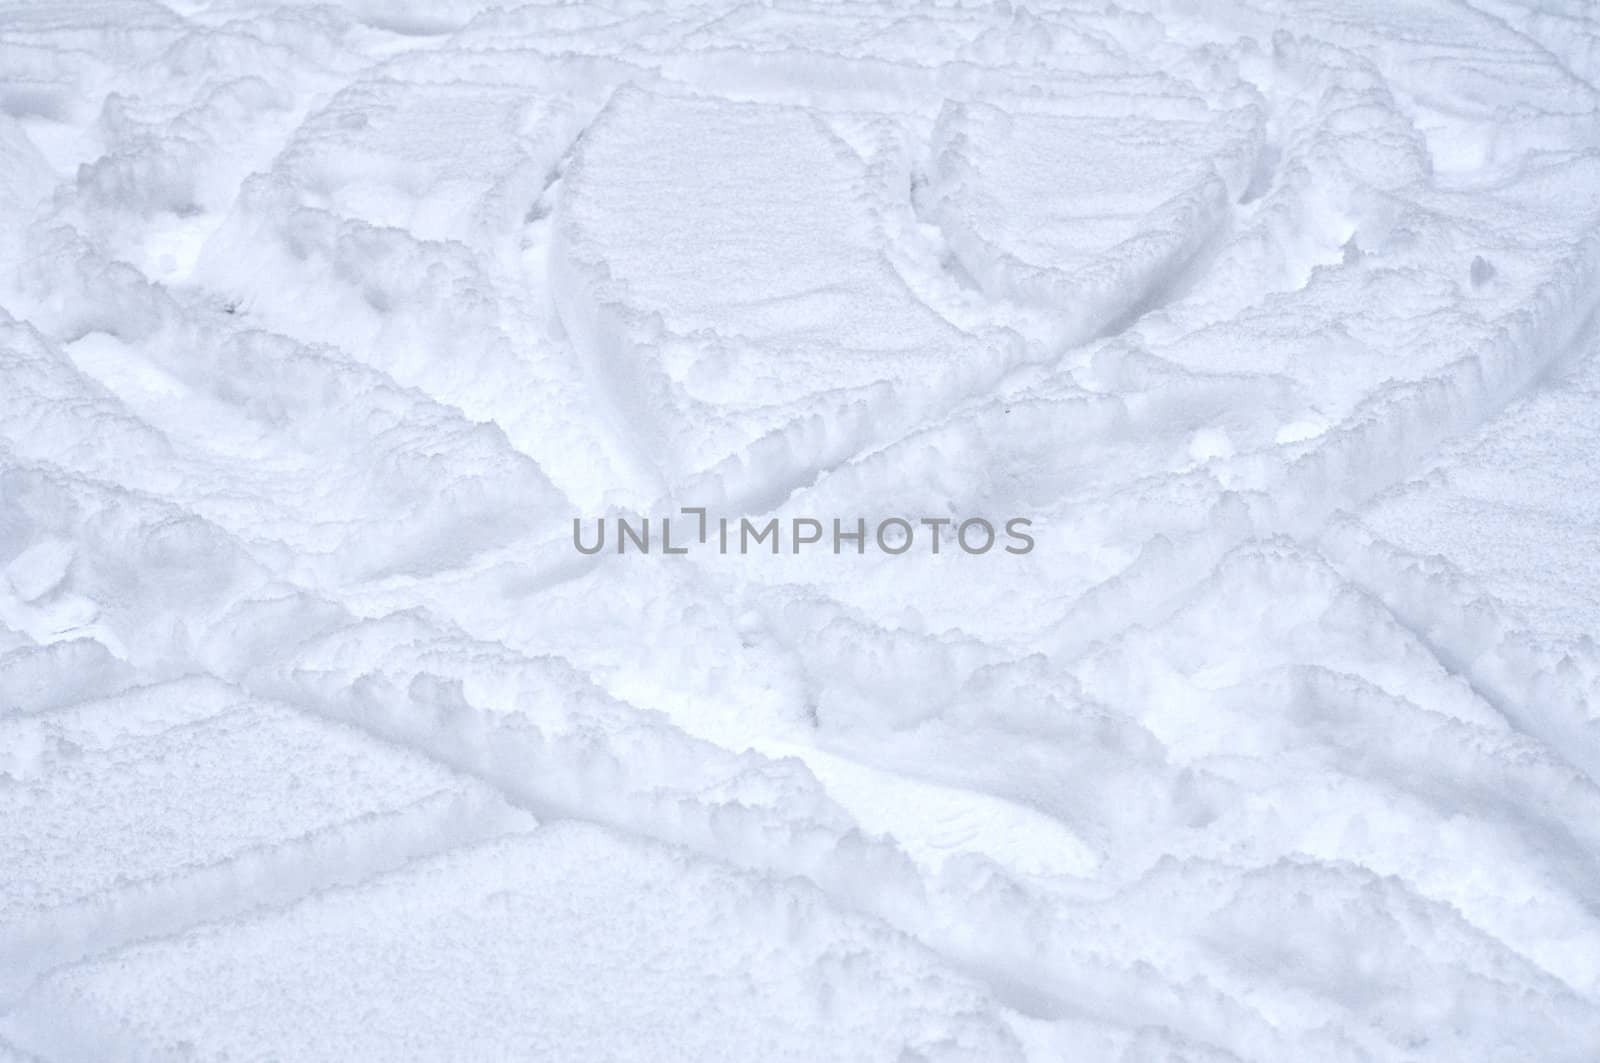 Texture of the snow with traces by DNKSTUDIO